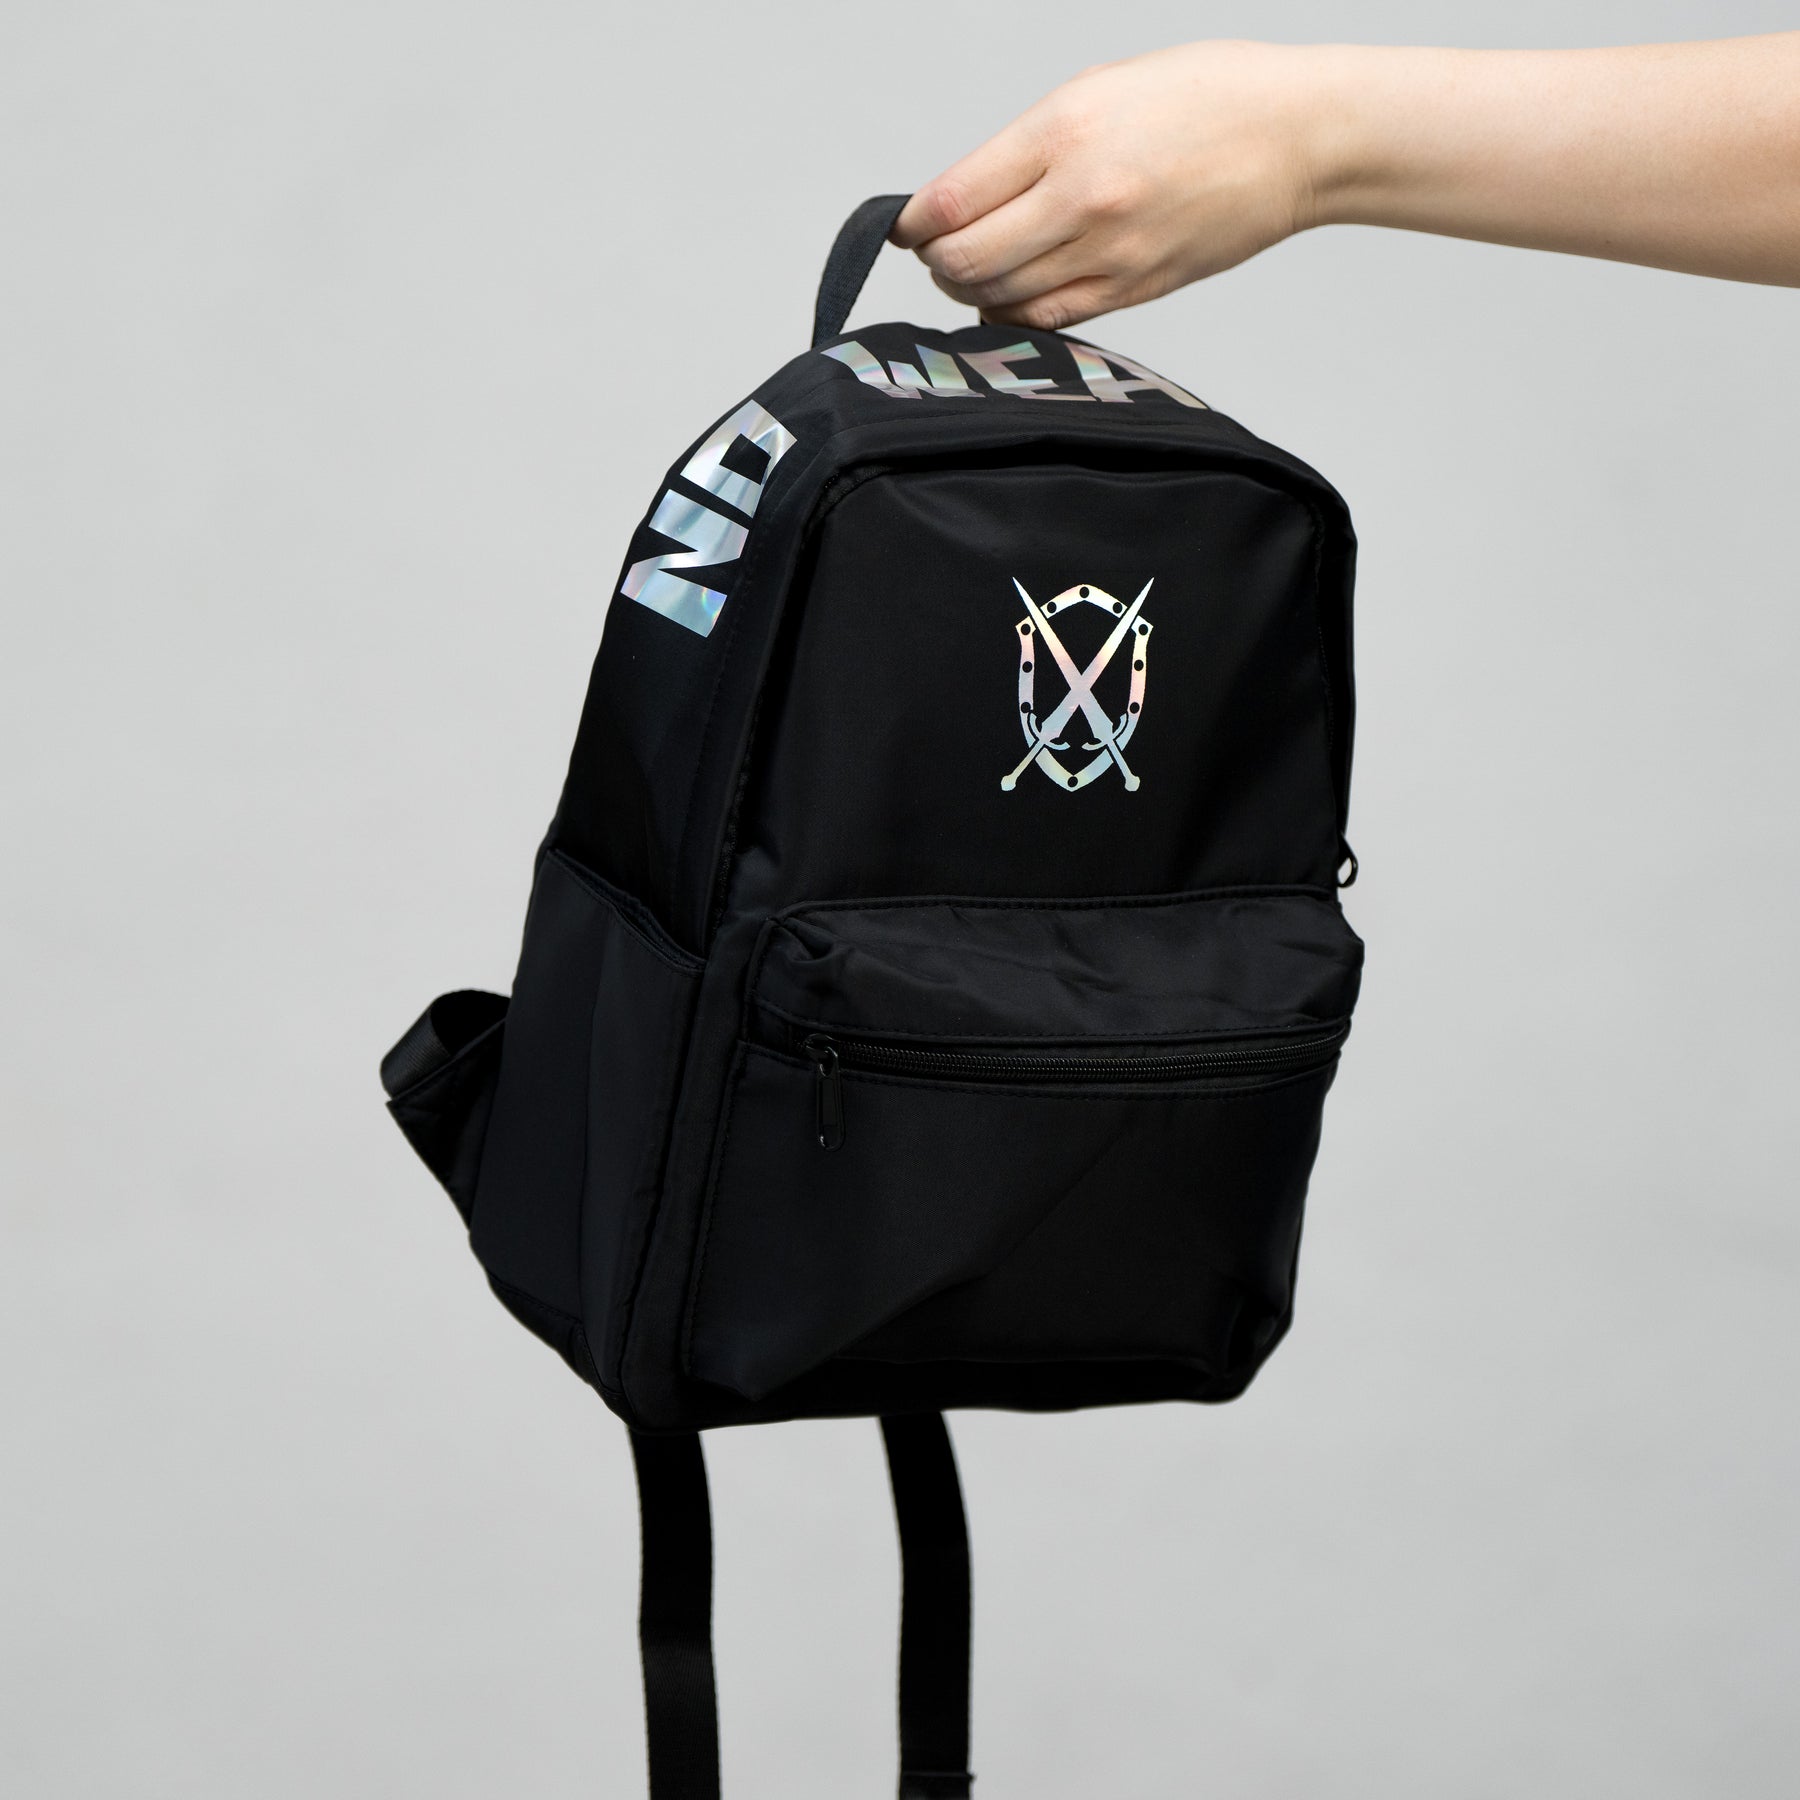 No Weapon Kids Backpack